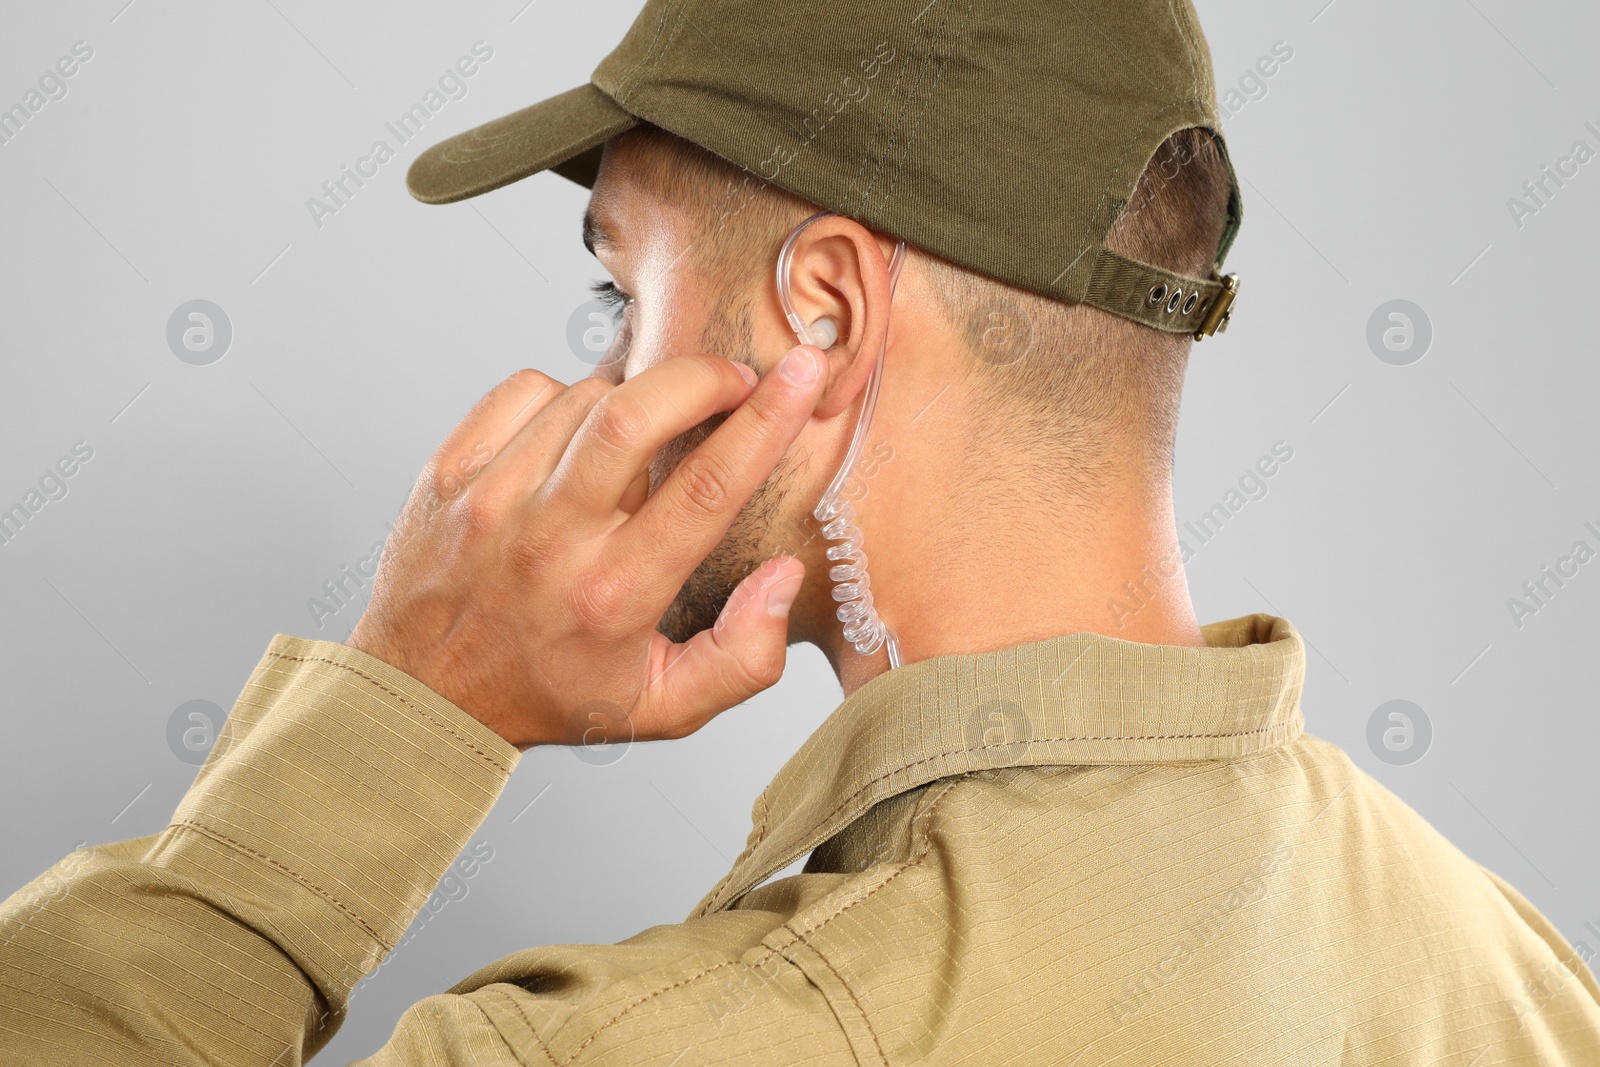 Photo of Male security guard in uniform using radio earpiece on grey background, closeup